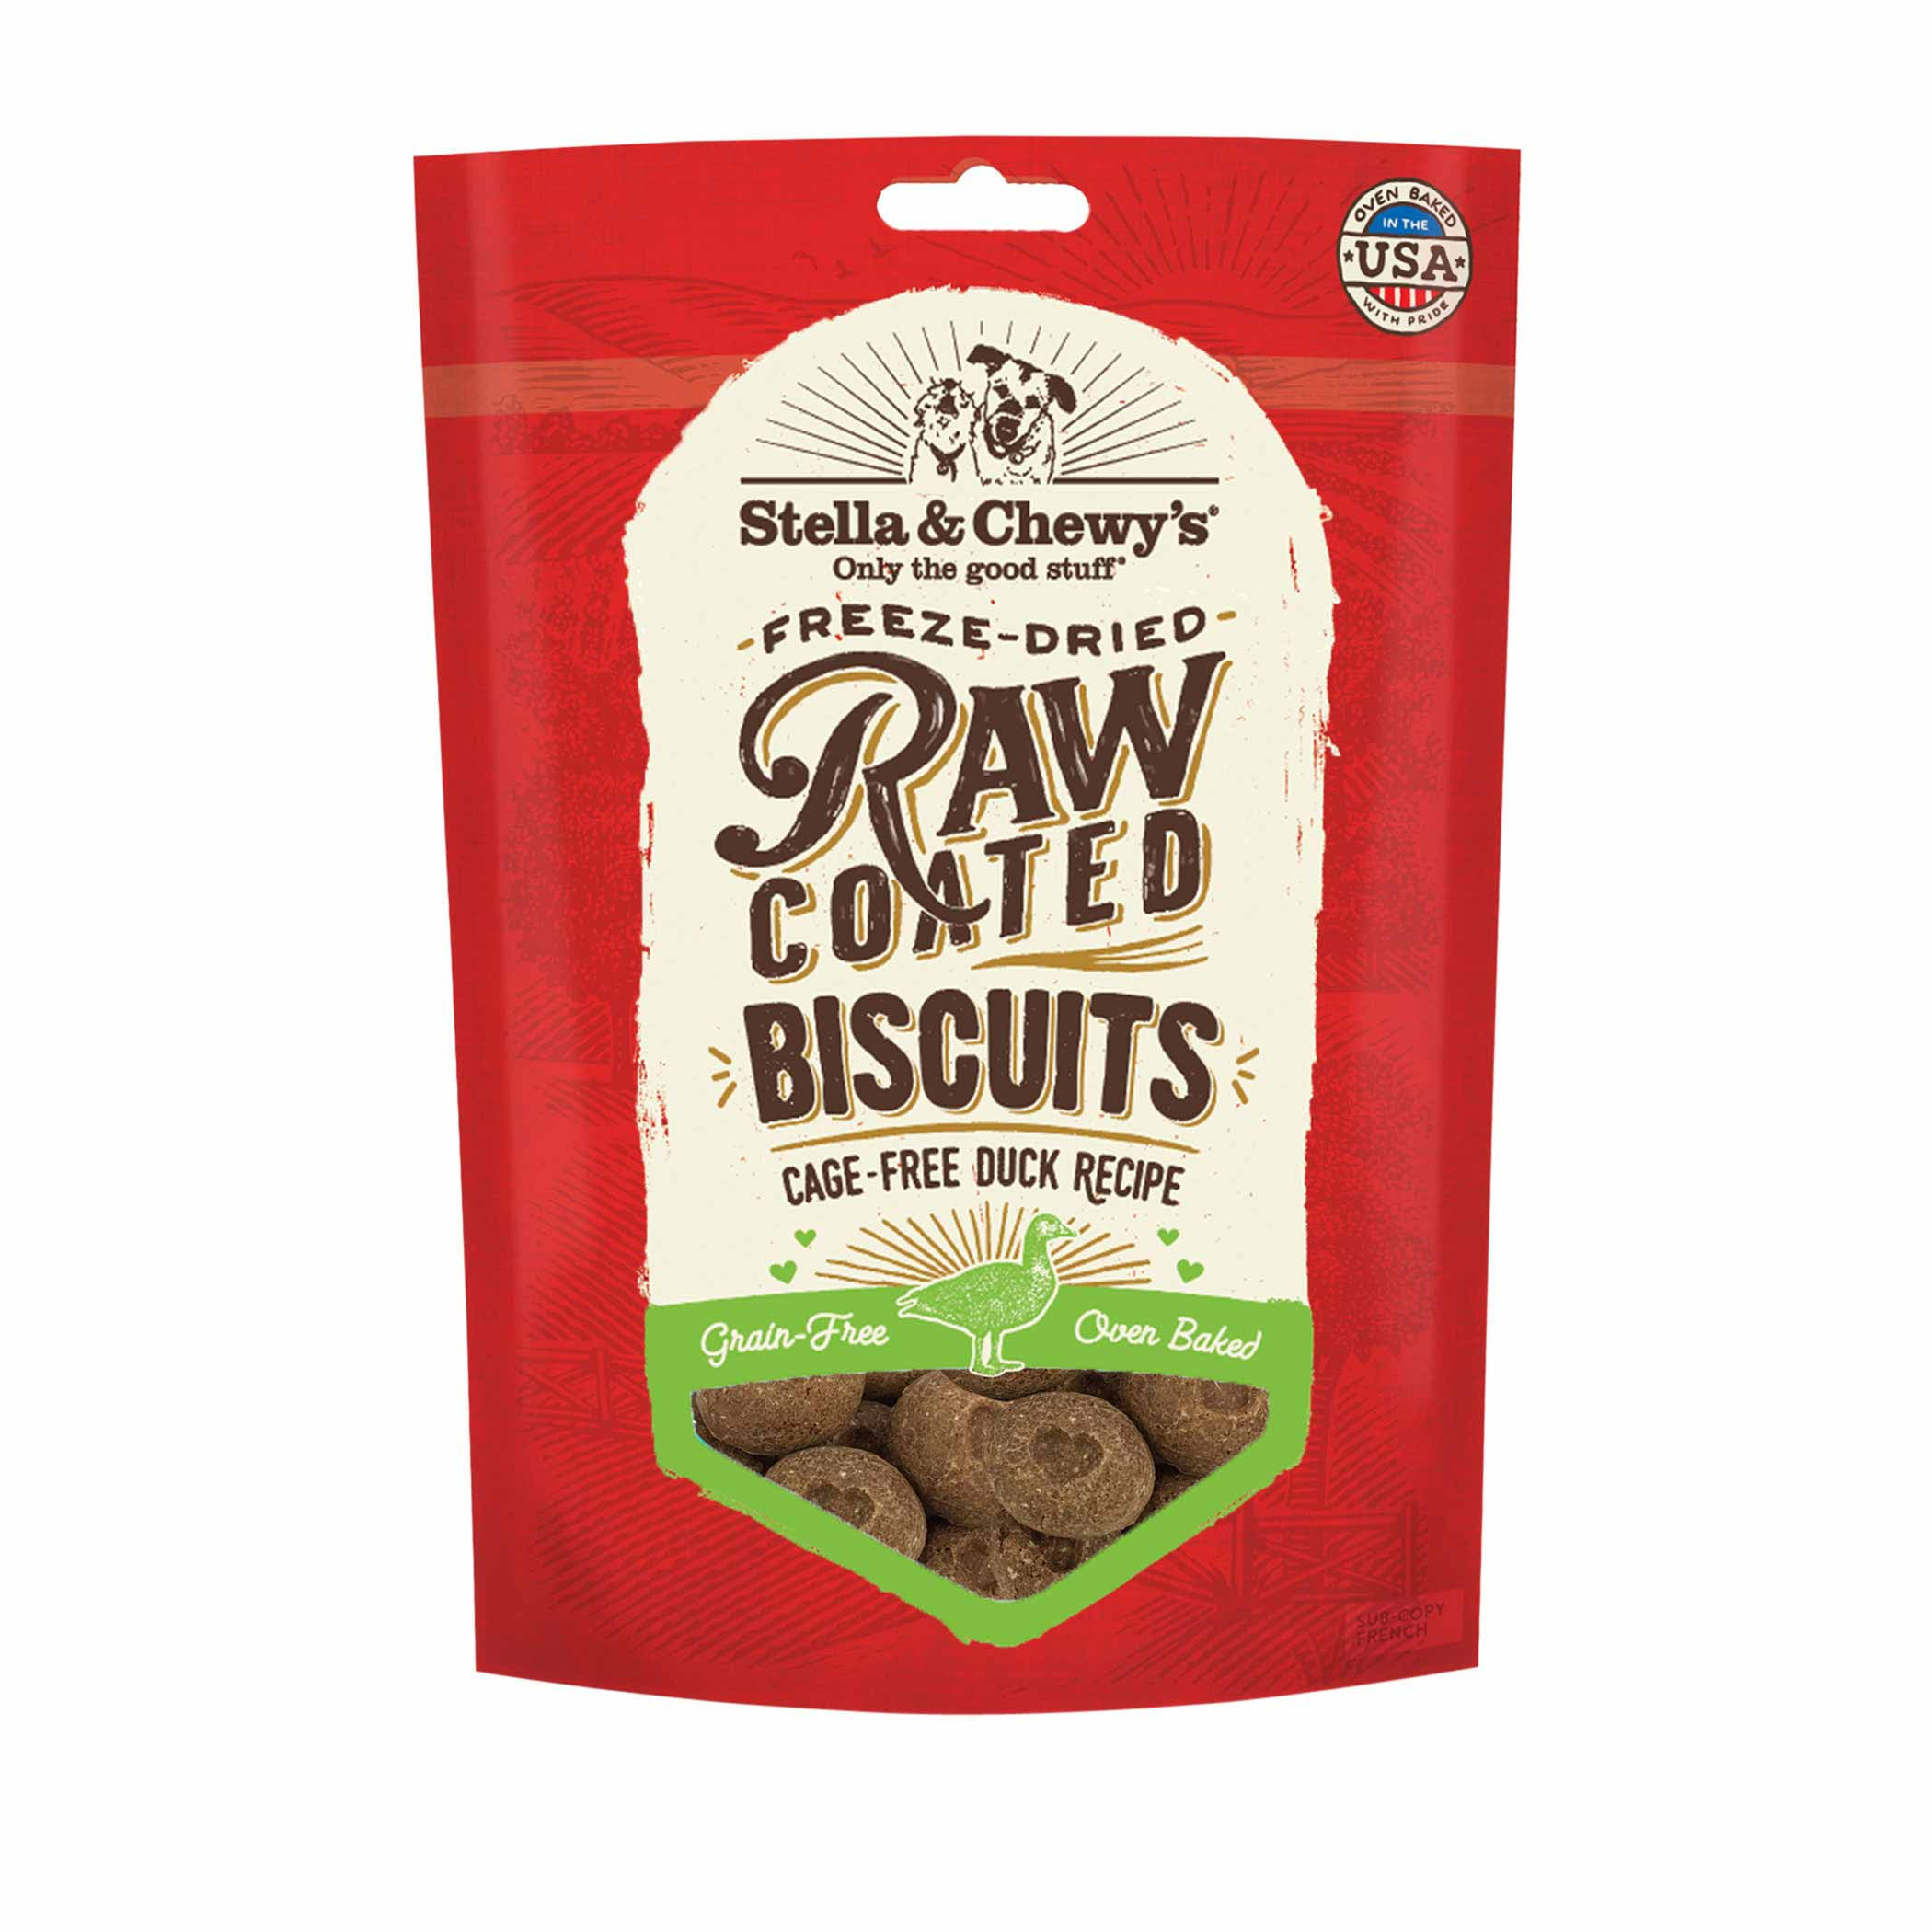 Stella & Chewy's Raw Coated Dog Biscuits - Cage-Free Duck Recipe